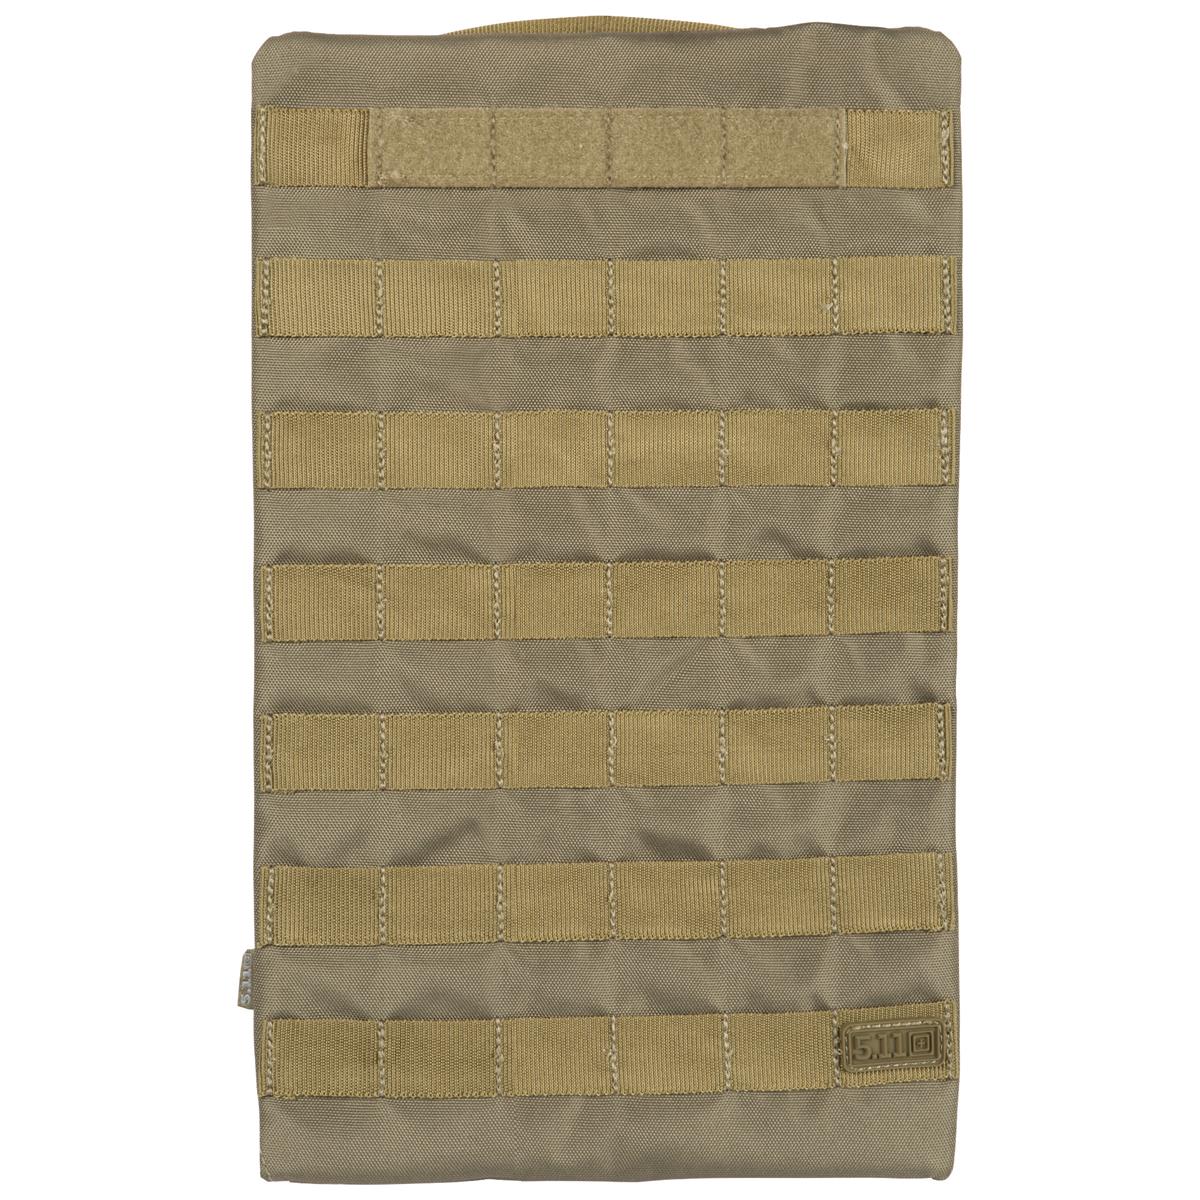 5.11 Tactical Small Covert Bag or Backpack Insert, Sandstone -  56280-328-1 SZ